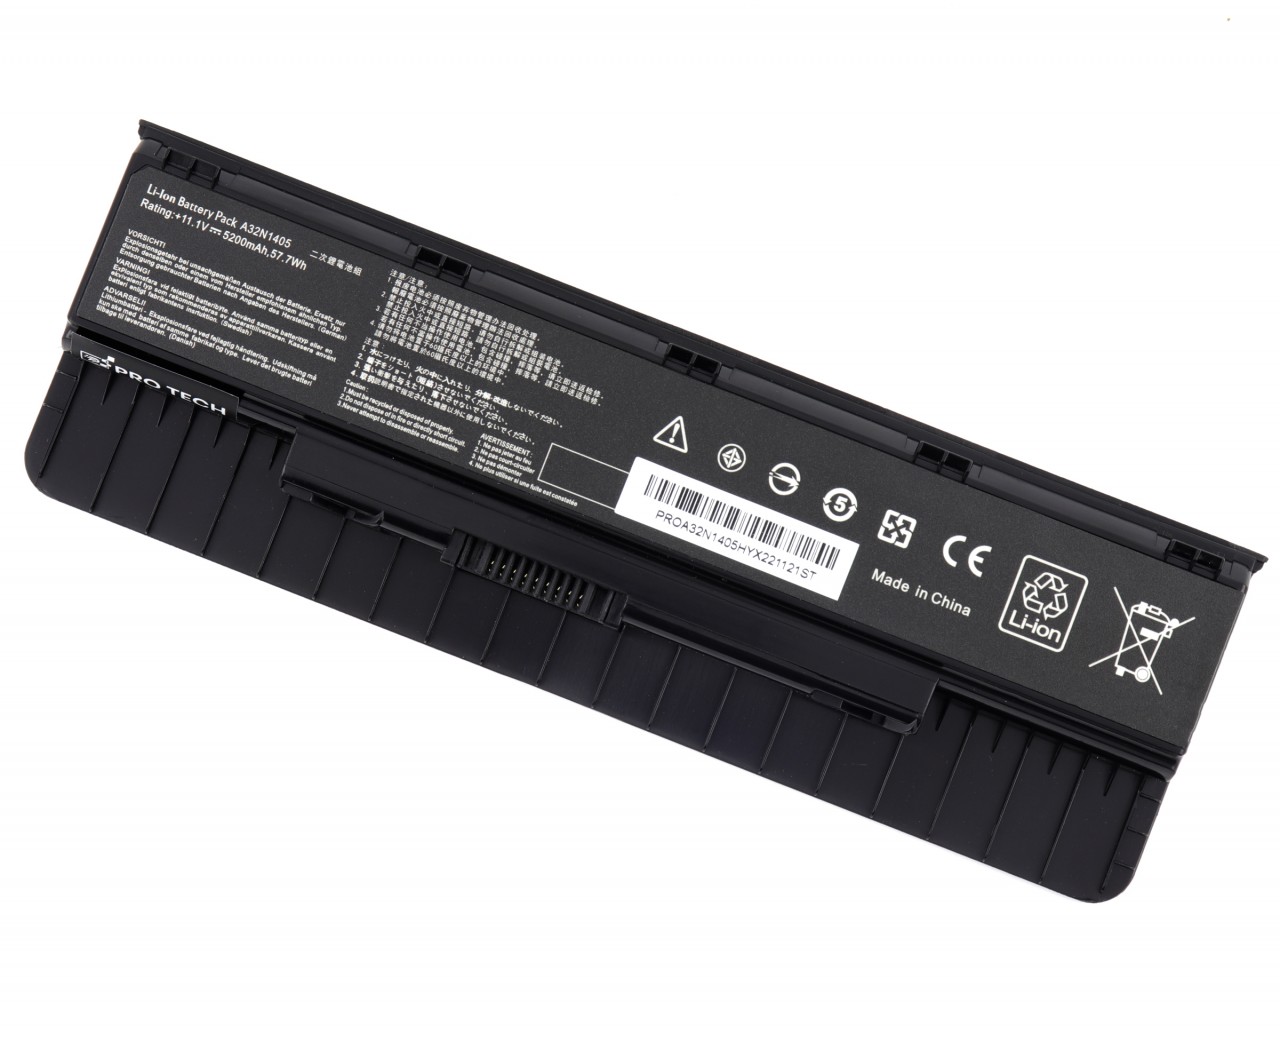 Baterie Asus N56VZ-S4044V 57.7Wh / 5200mAh Protech High Quality Replacement